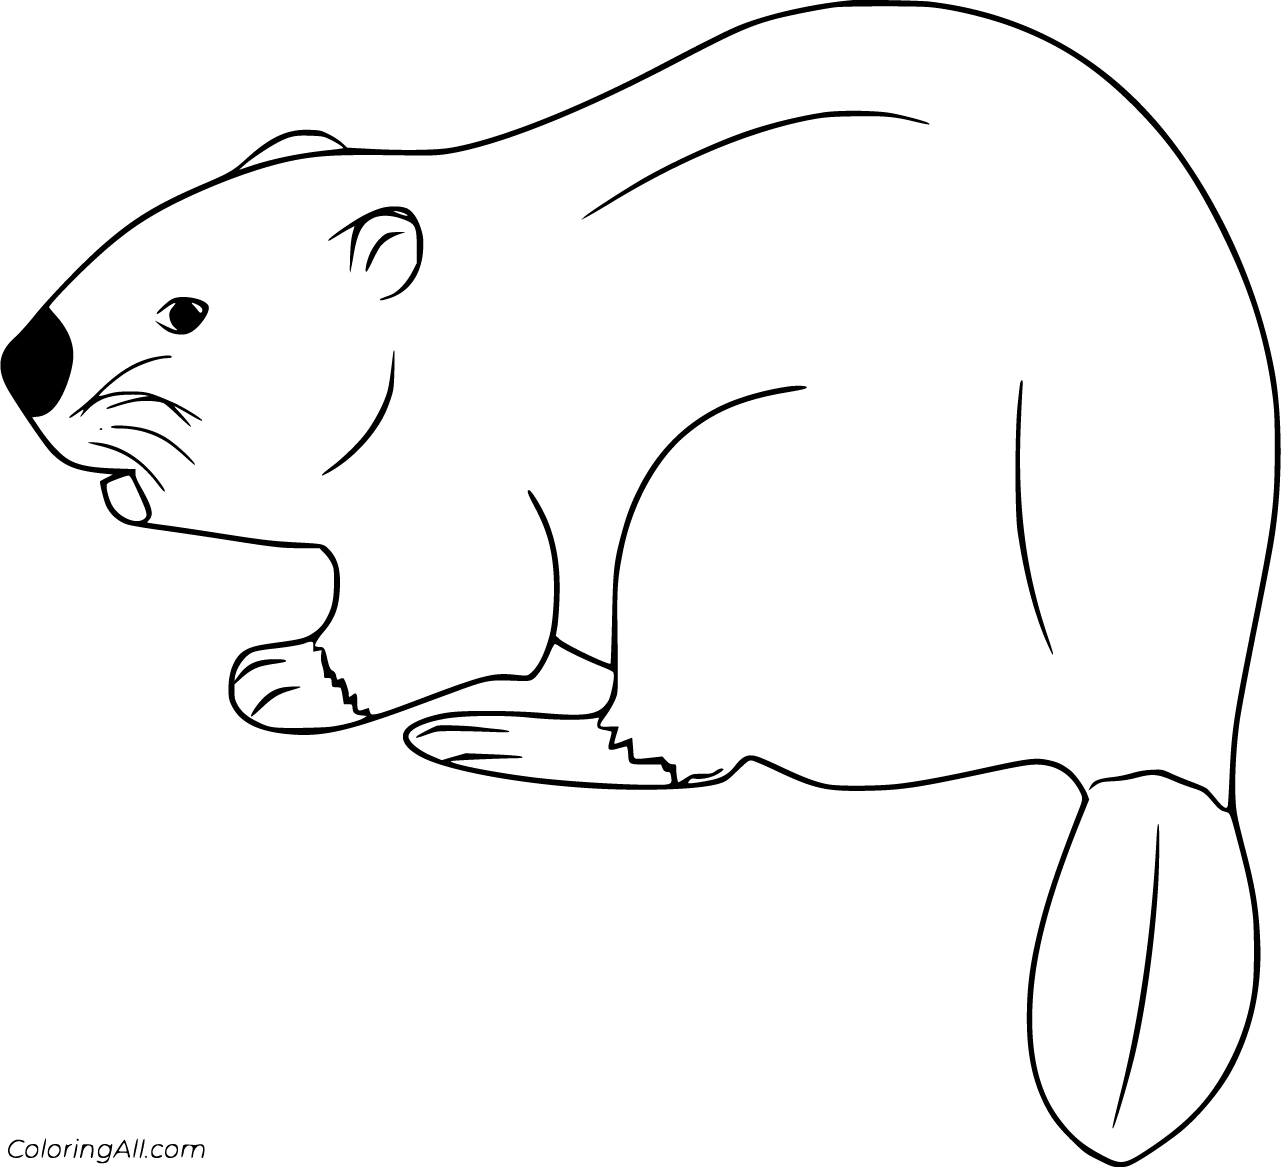 Beaver Coloring Pages - ColoringAll